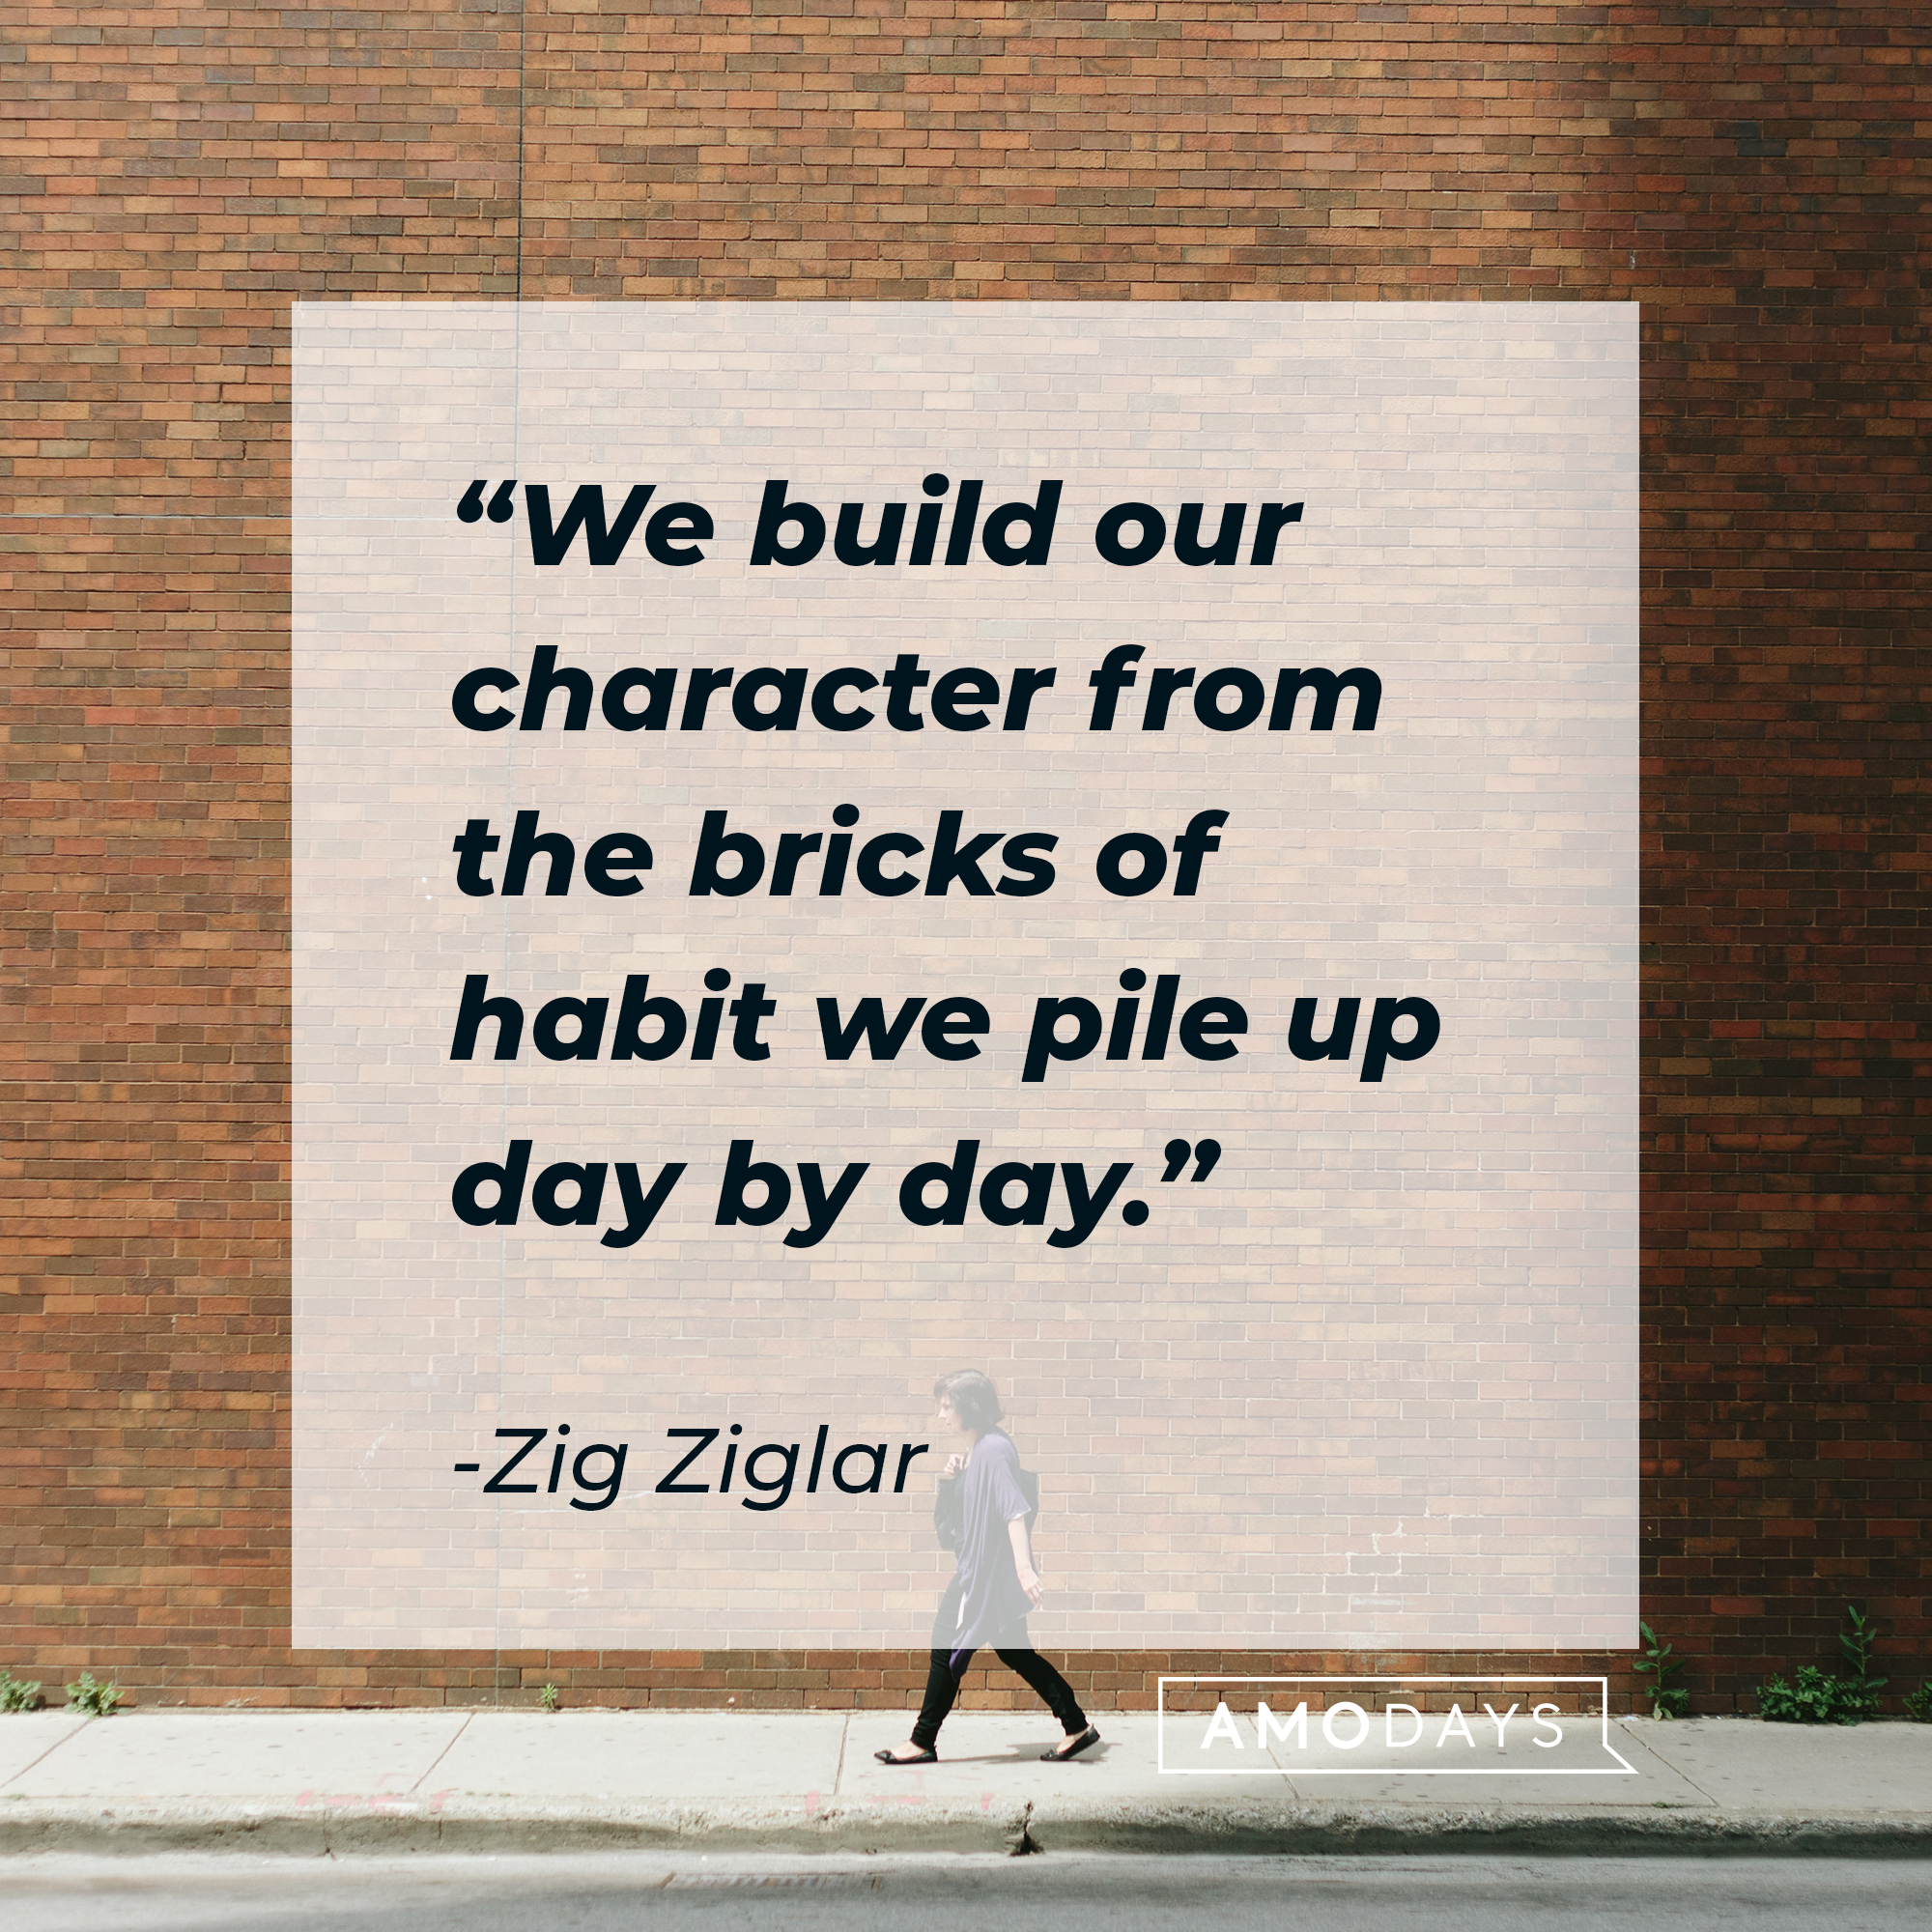 Zig Ziglar's quote: "We build our character from the bricks of habit we pile up day by day." | Source: Unsplash